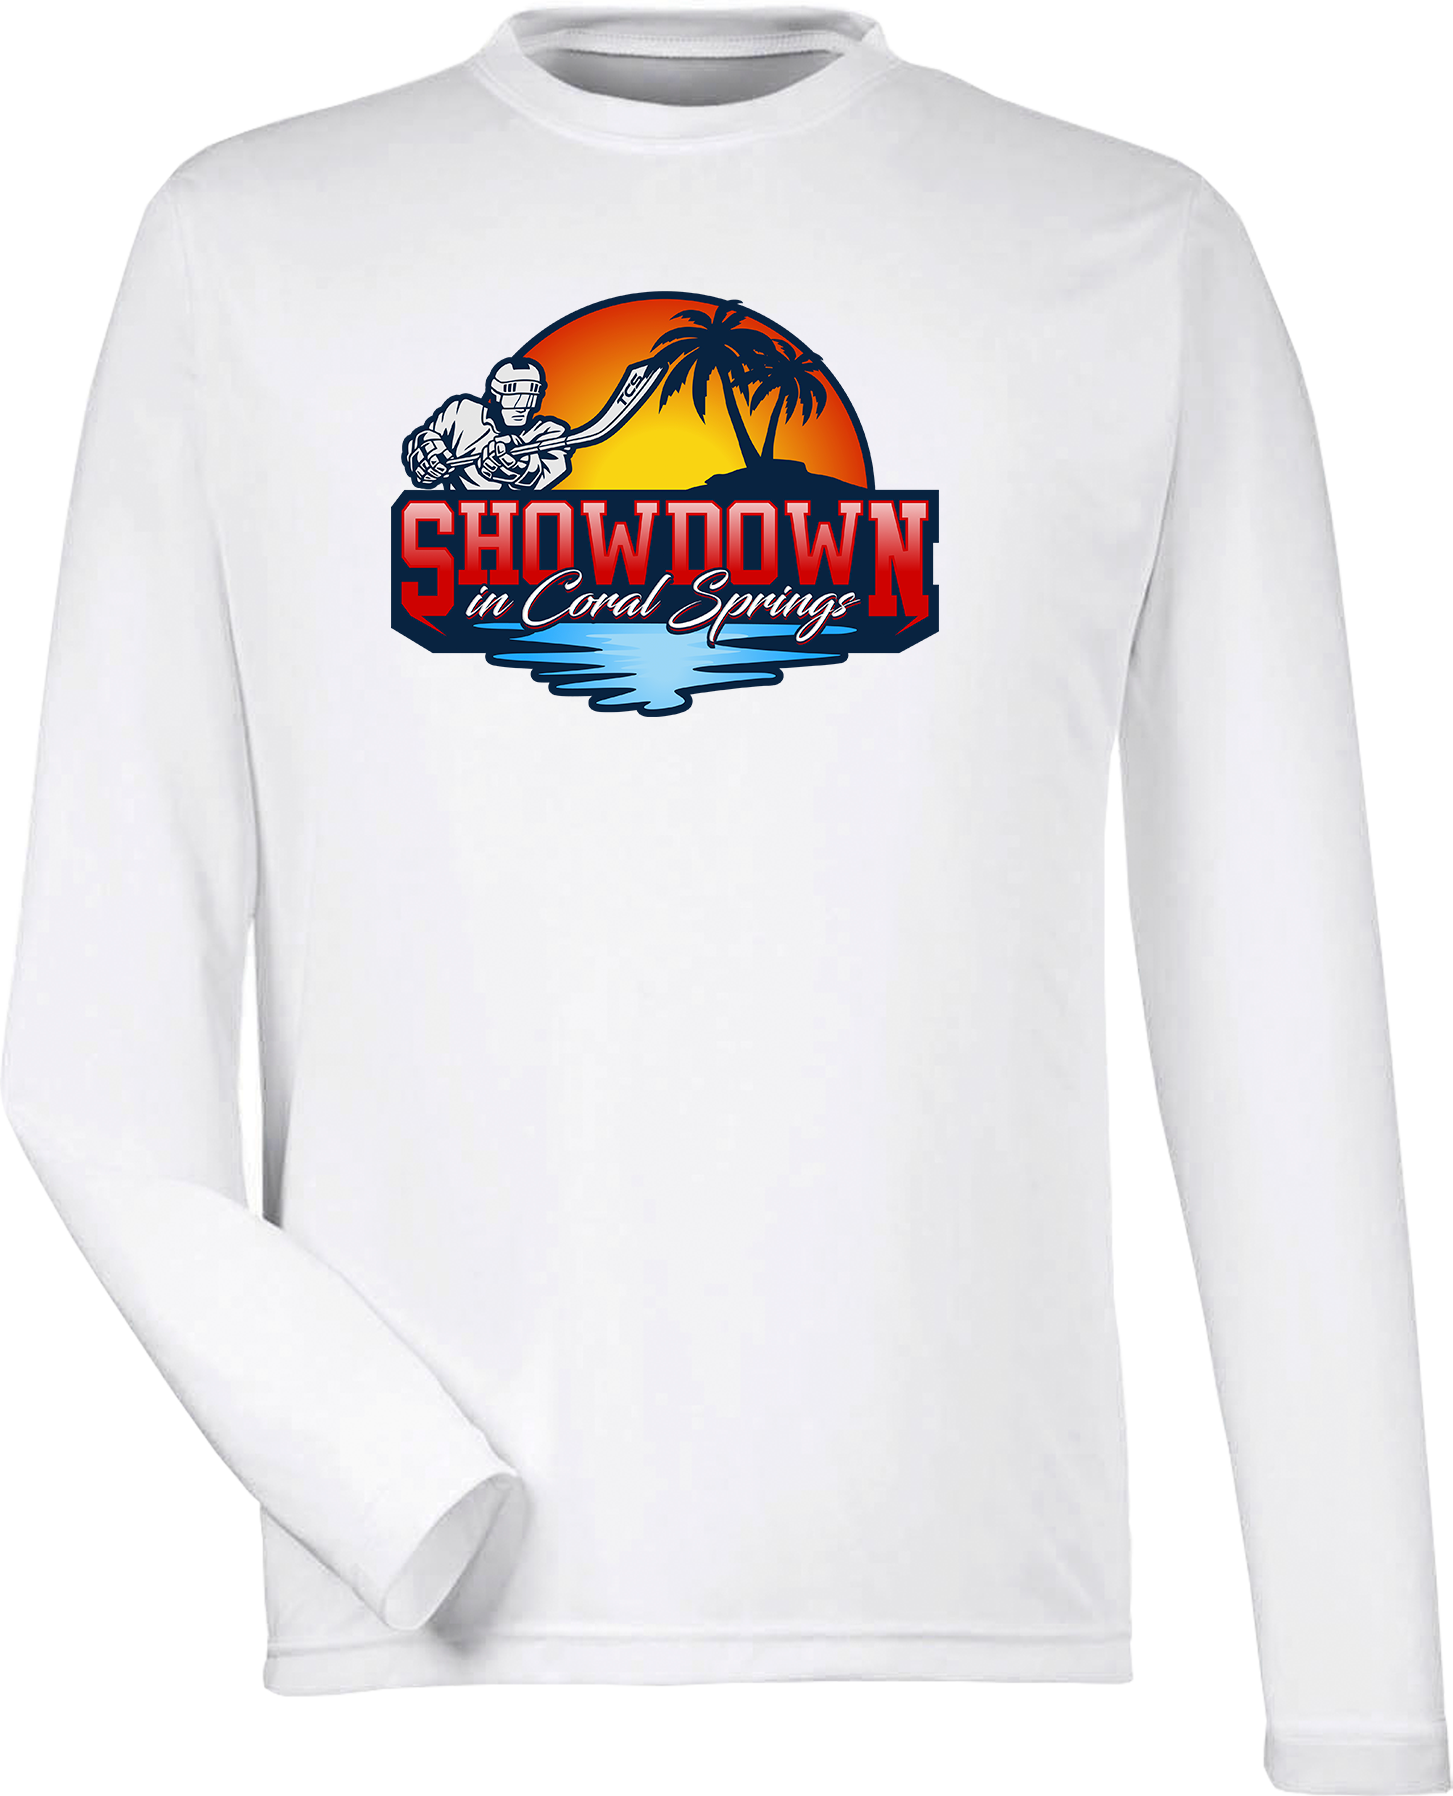 PERFORMANCE SHIRTS - 2023 Showdown in Coral Springs